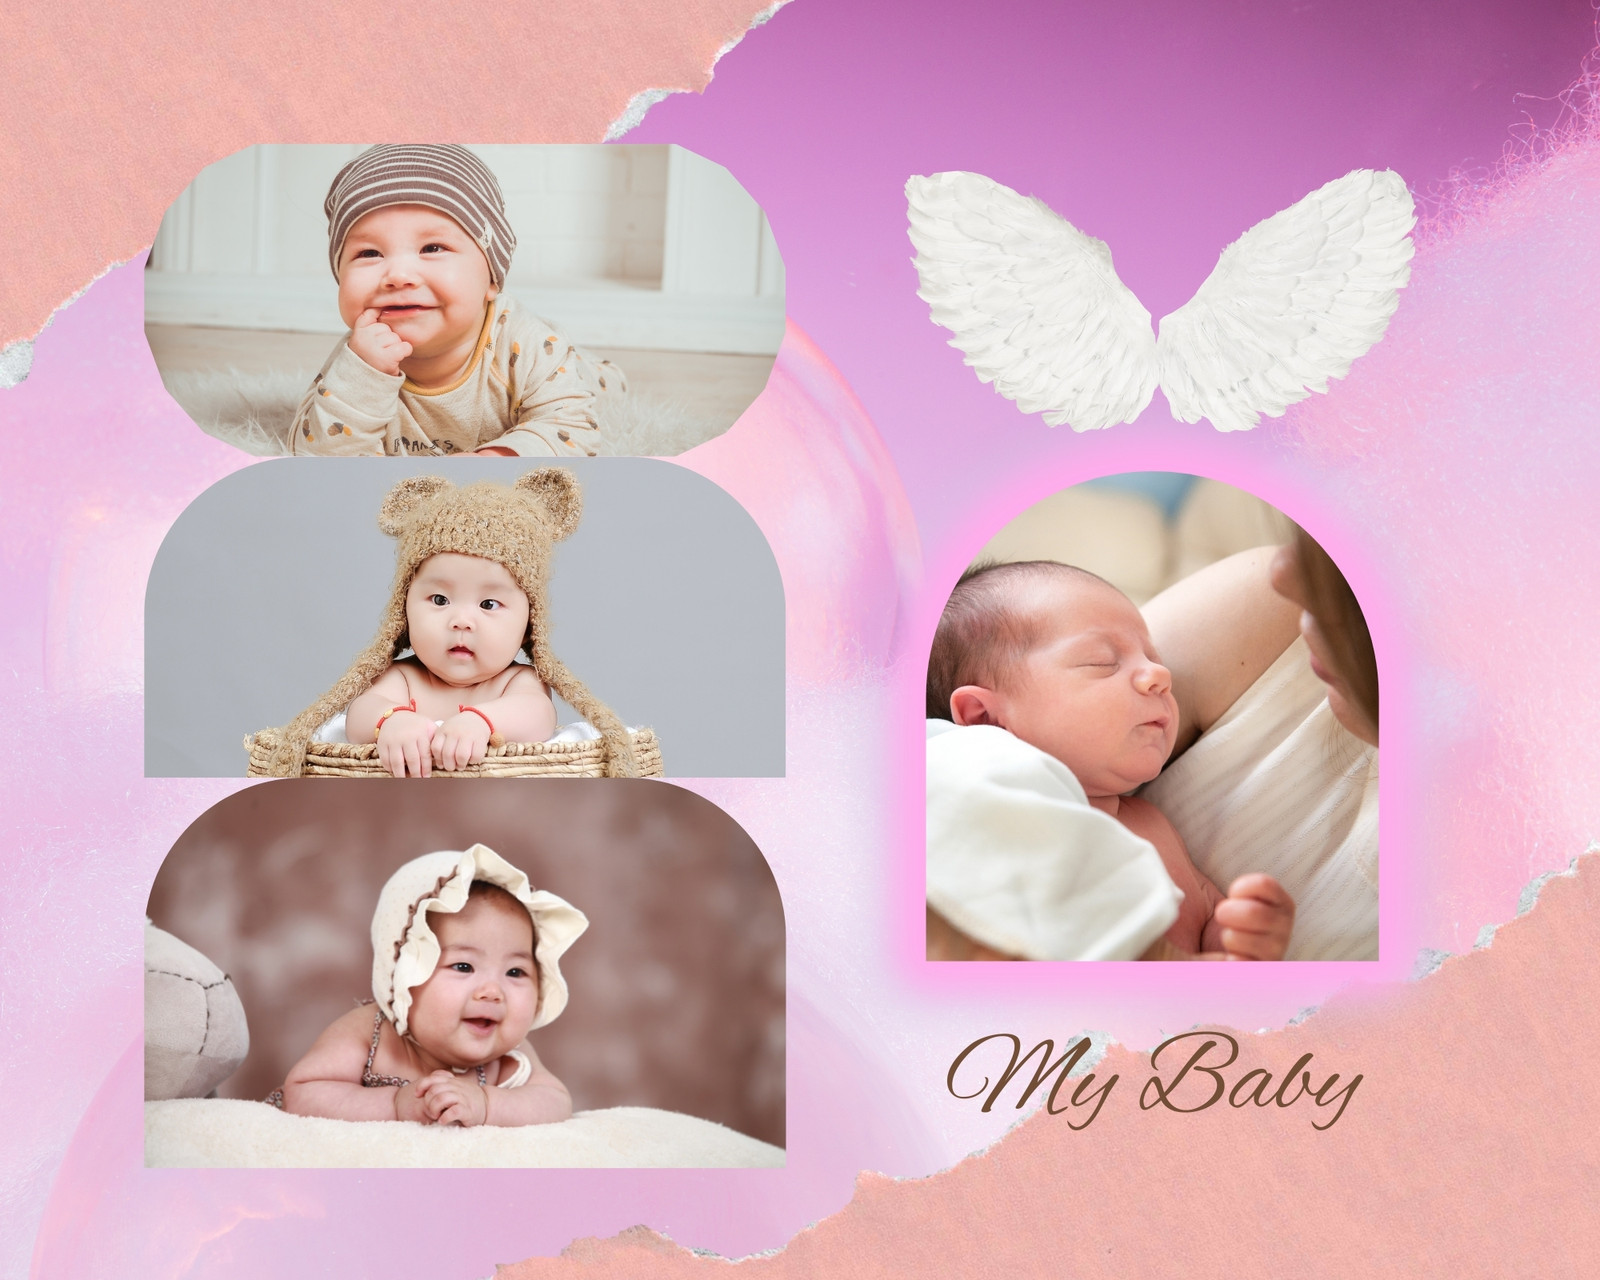 https://marketplace.canva.com/EAFHAioL4VE/1/0/1600w/canva-pink-aesthetic-baby-photo-collage-6Za-IAmMfFE.jpg